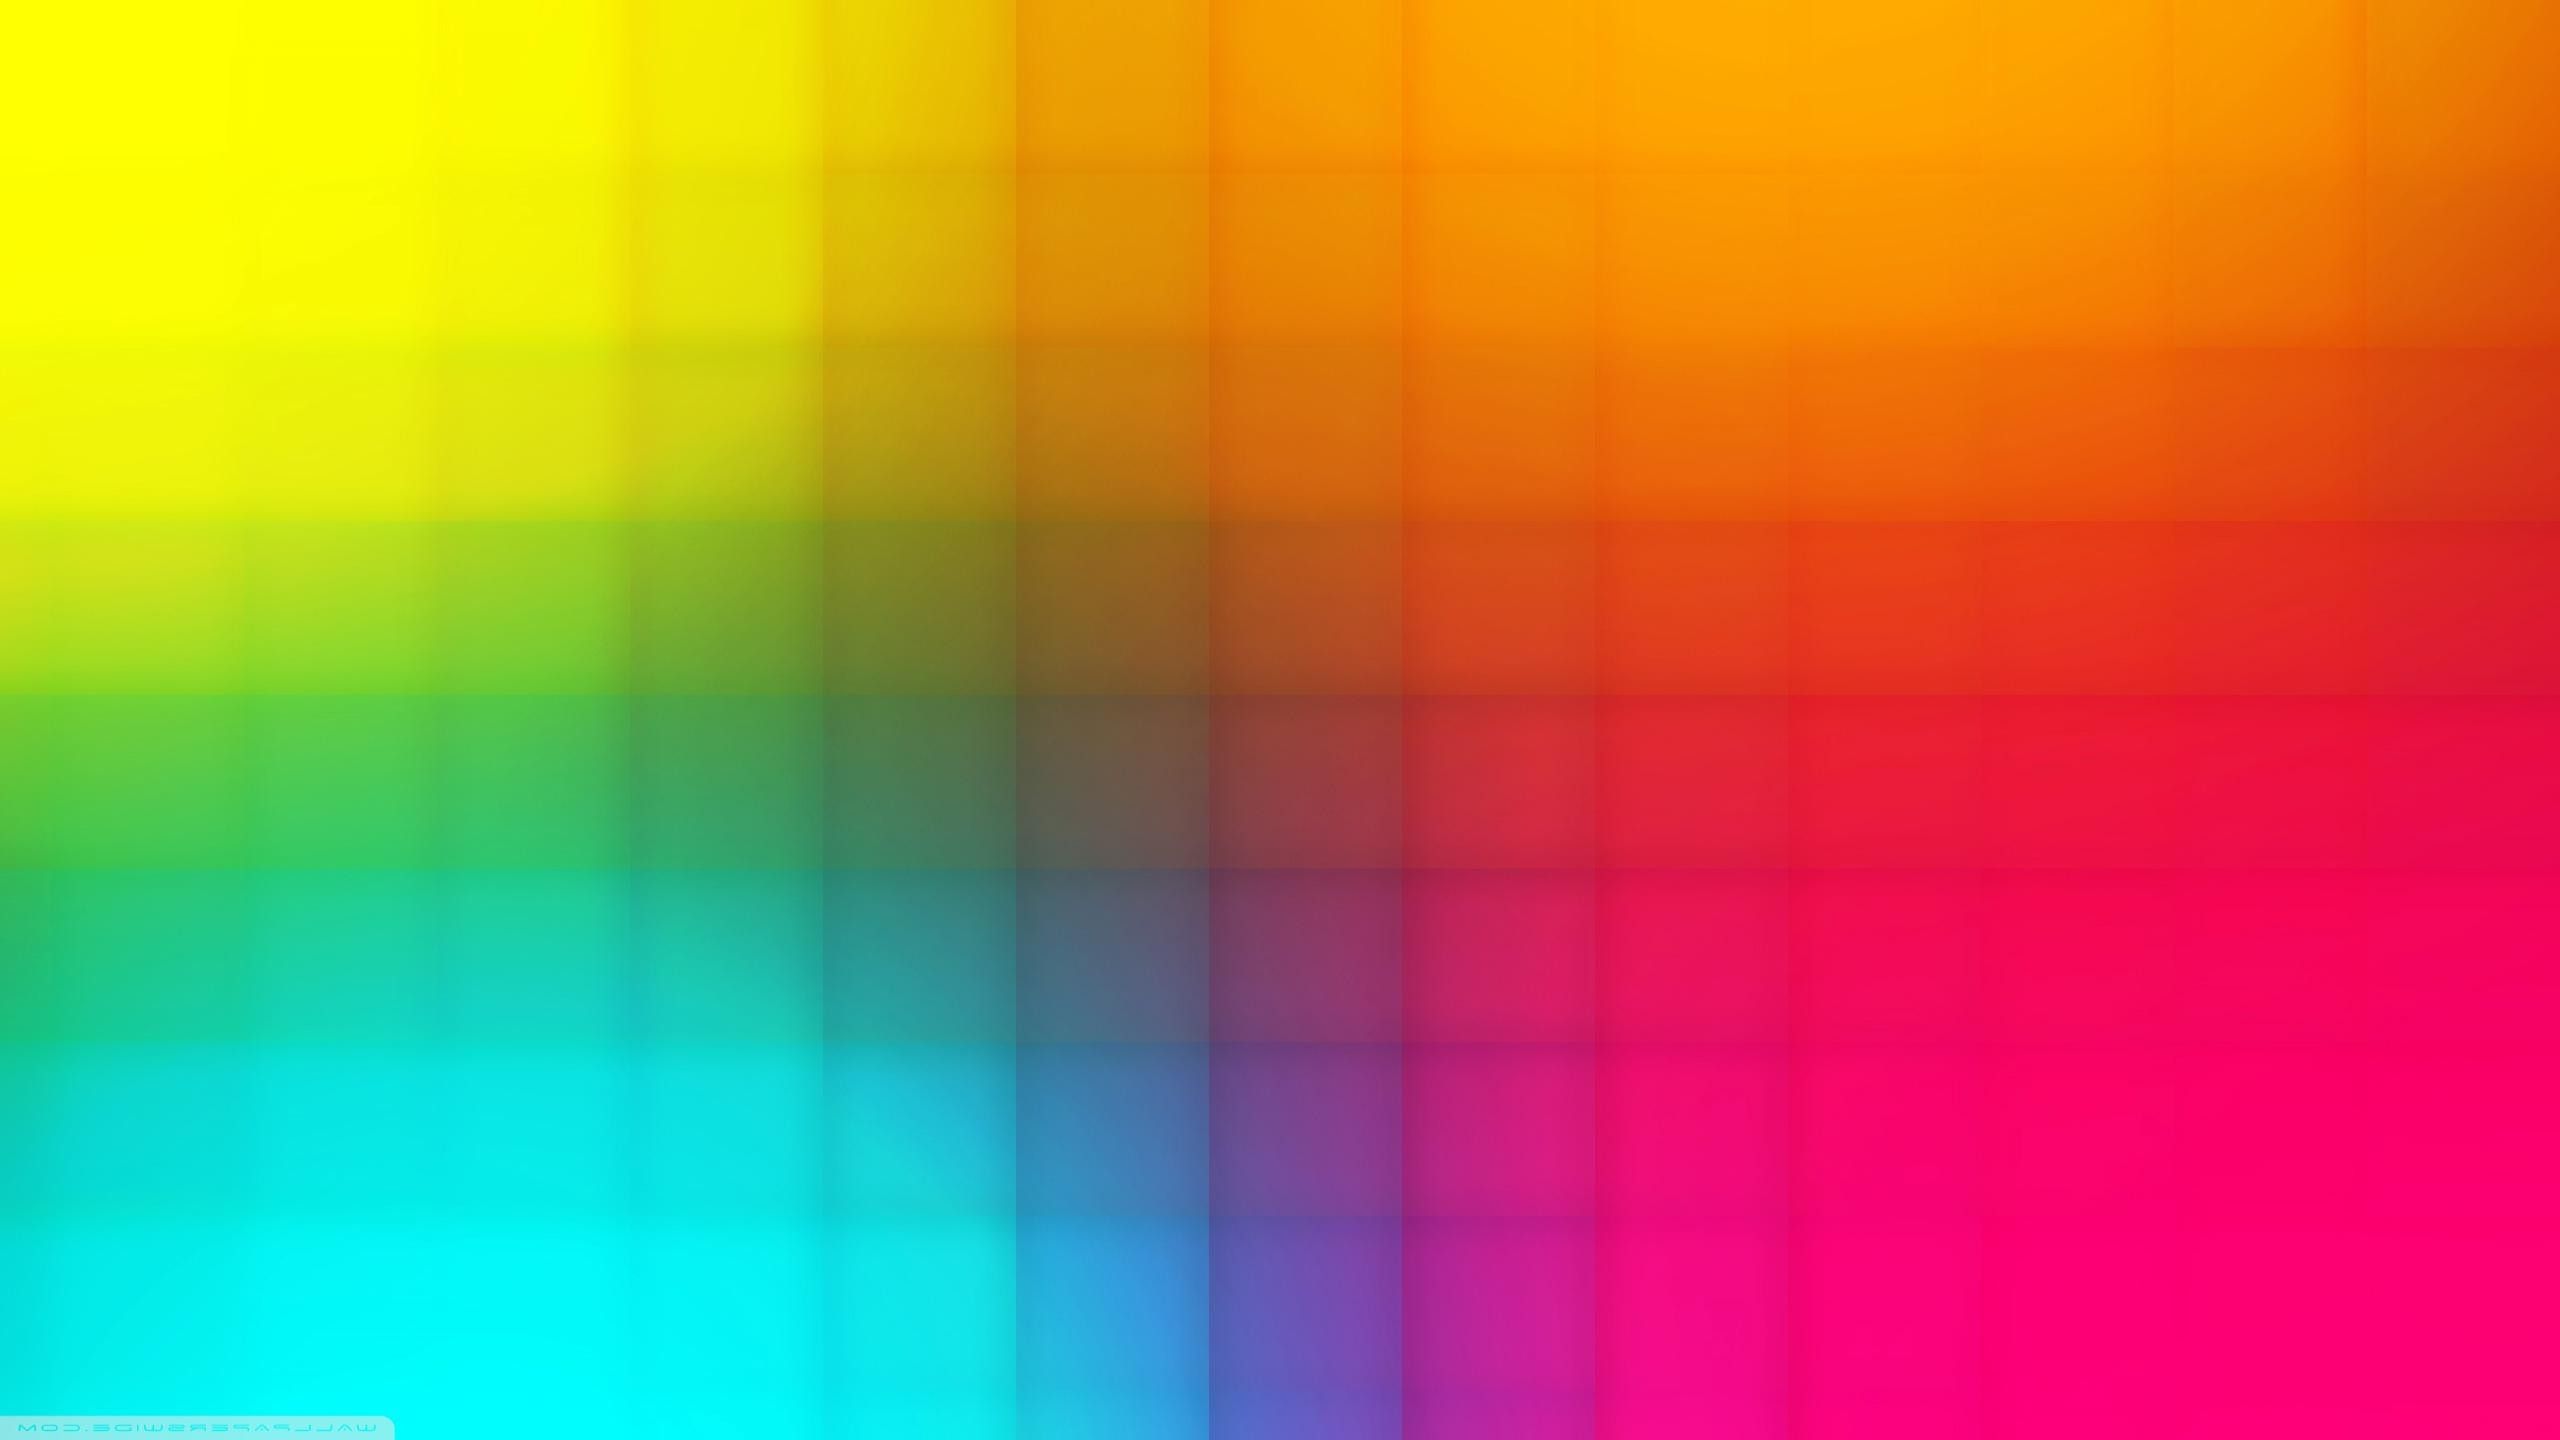 A colorful background with squares and lines - 2560x1440